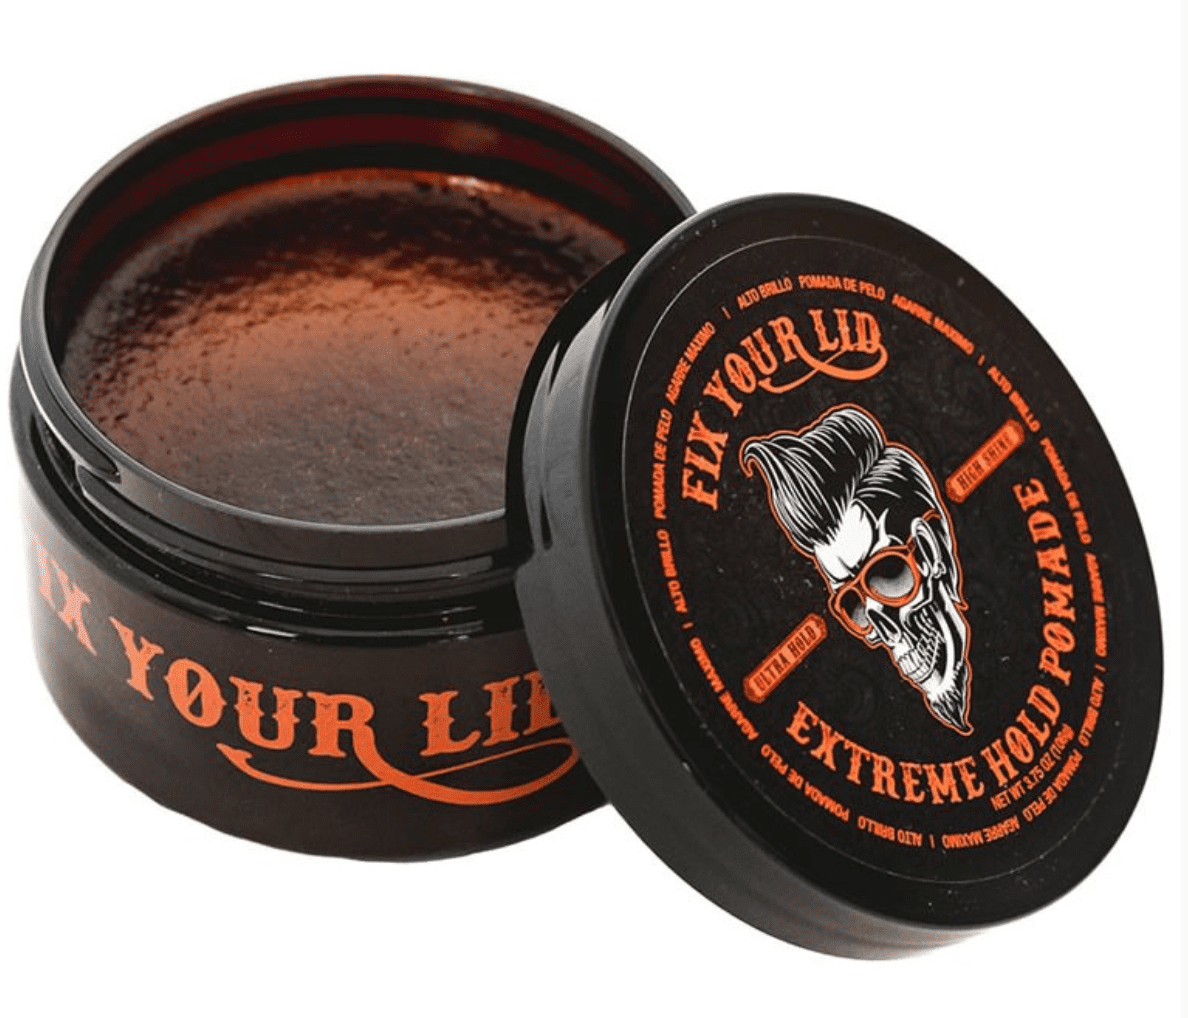 Fix You Lid High Hold Styling Fiber 3.75oz Mens Hair Cream with Low Shine -  Styling Fiber for Short and Long Hair Types